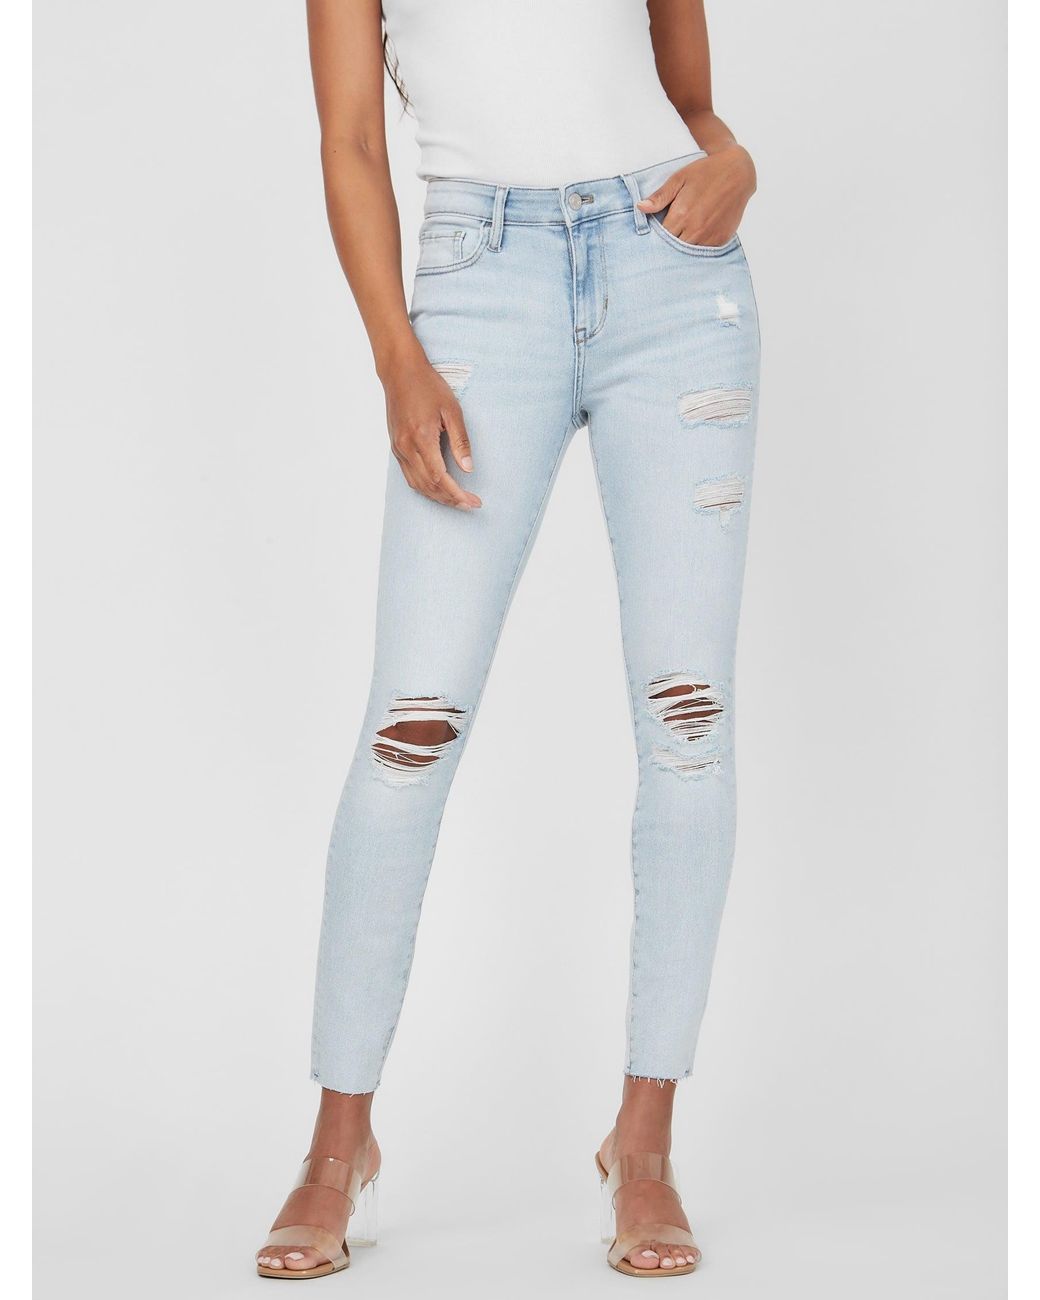 Guess Factory Nell Skinny Jeans in Blue | Lyst